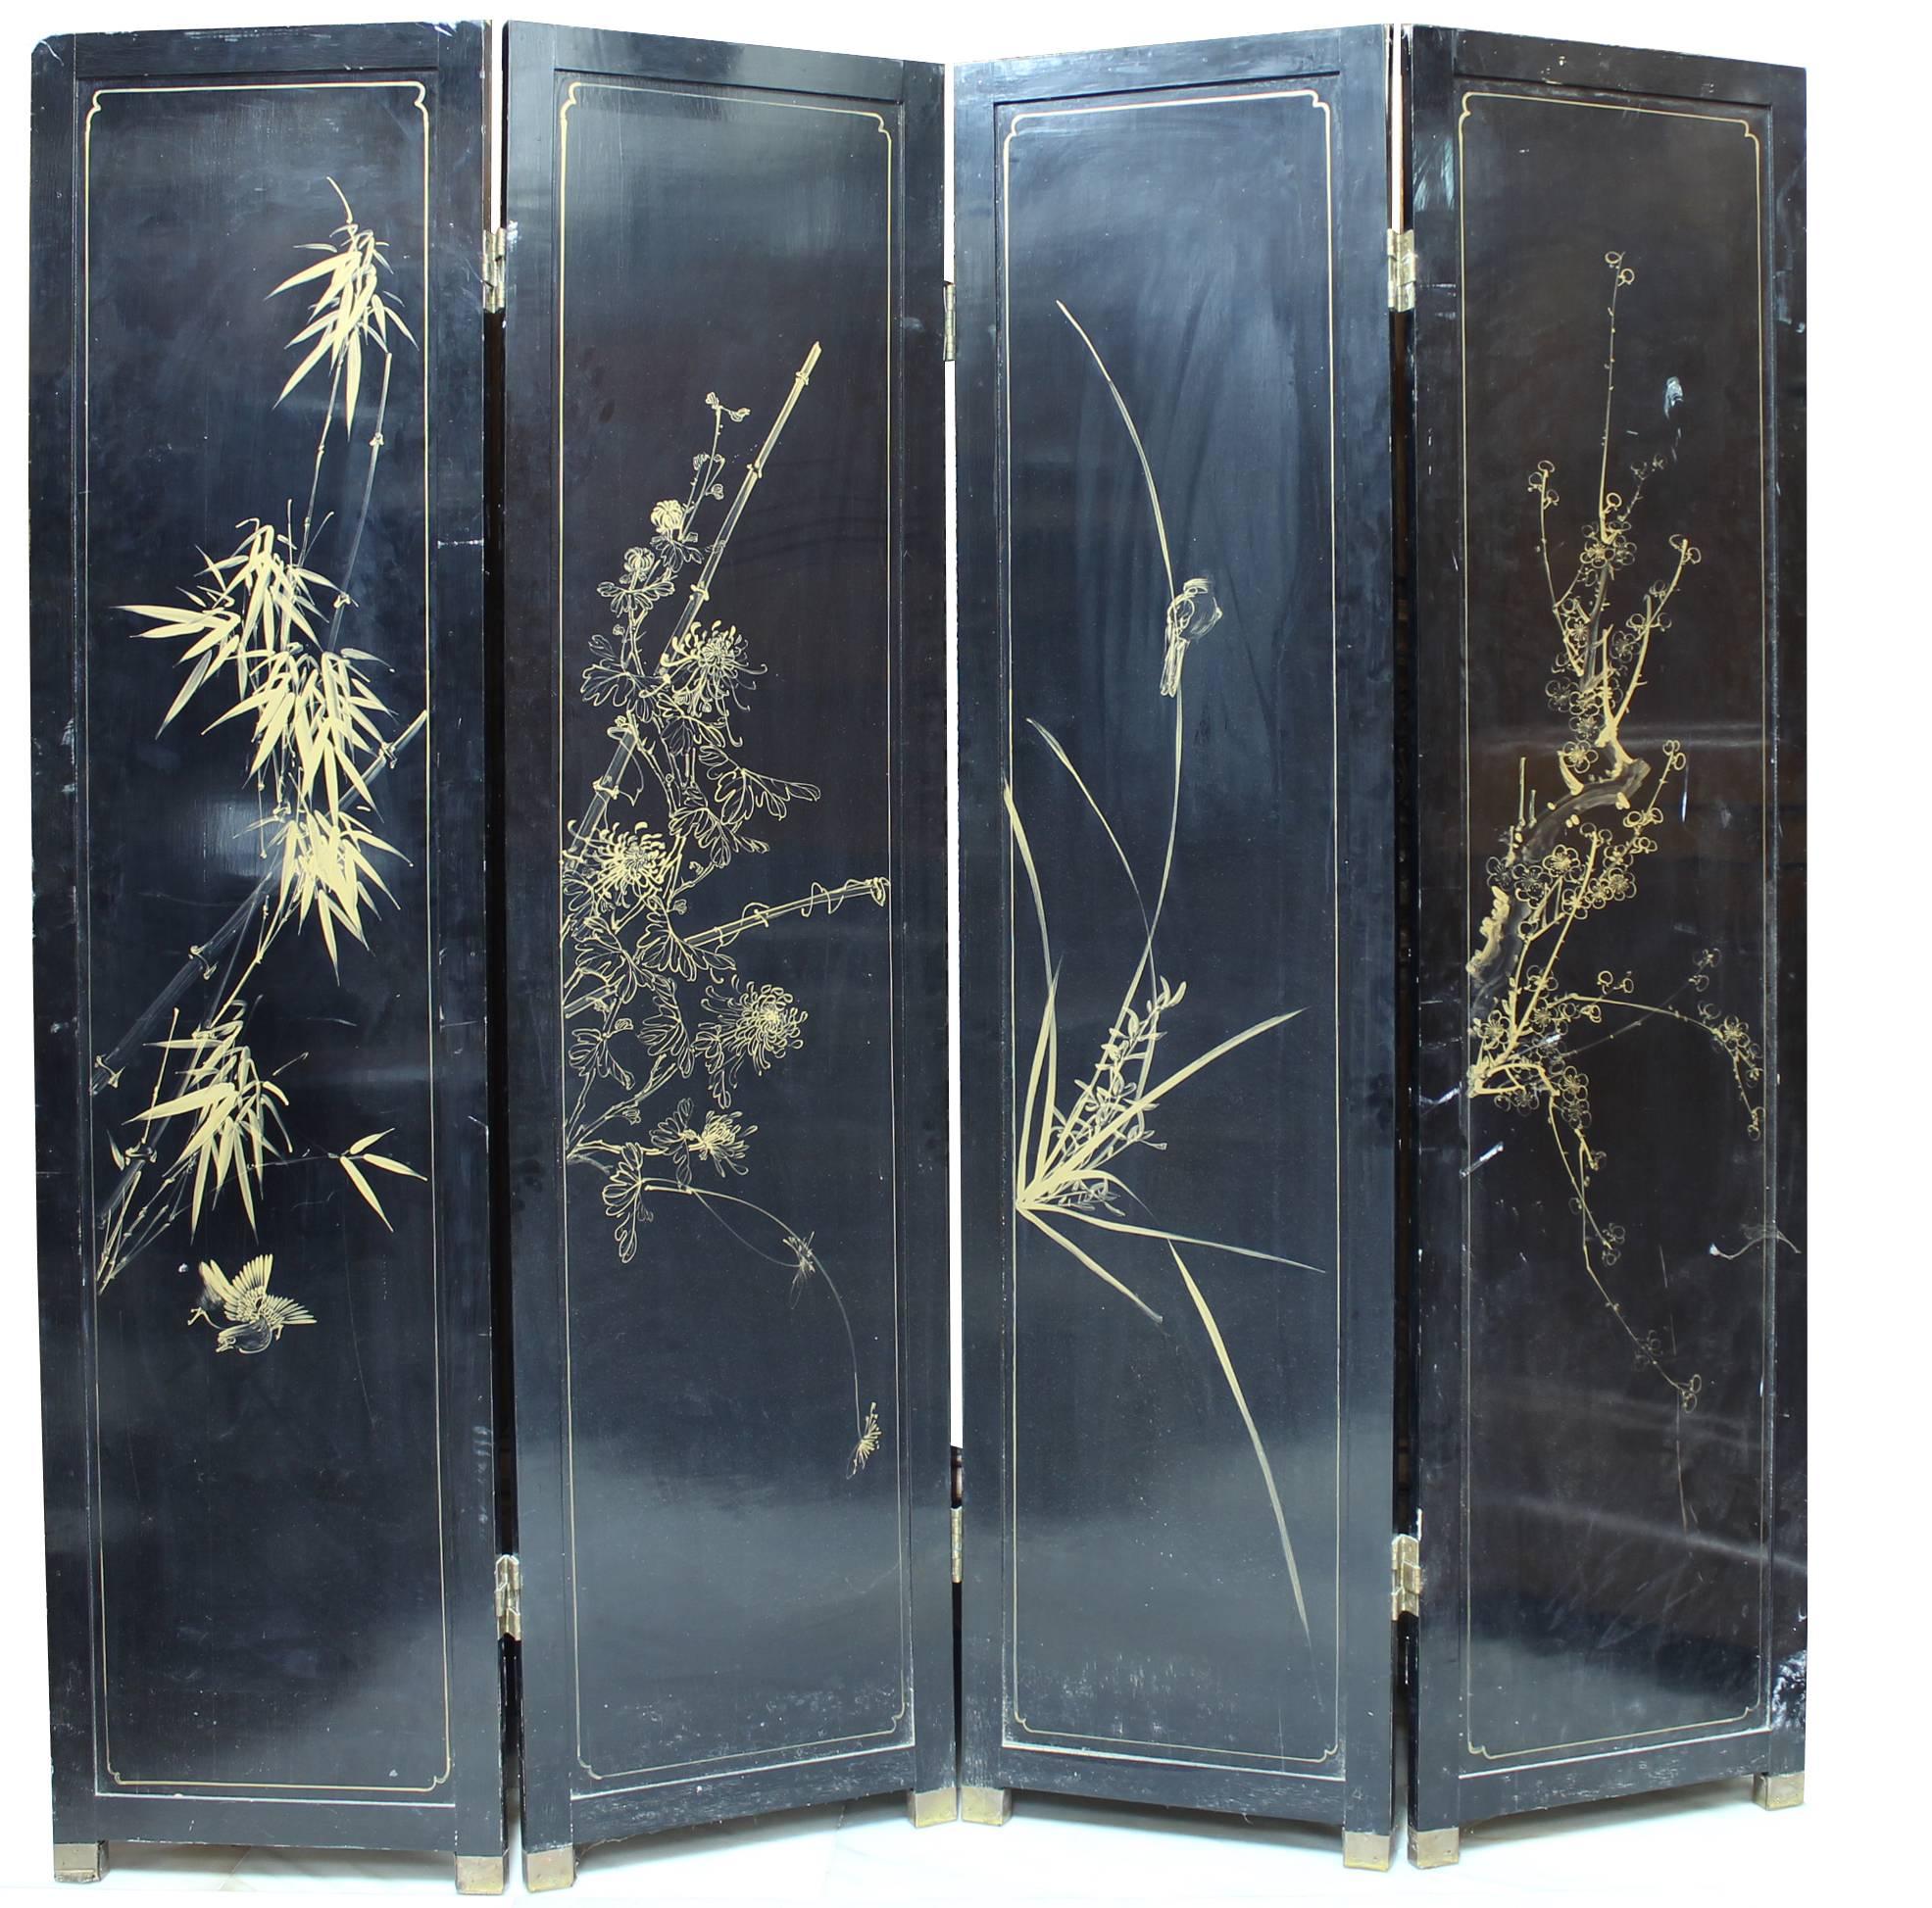 Four panel blanck and white lacquer screen decorated with a natural scene of birds and plants made with different coloured jade and other hard stones. 

